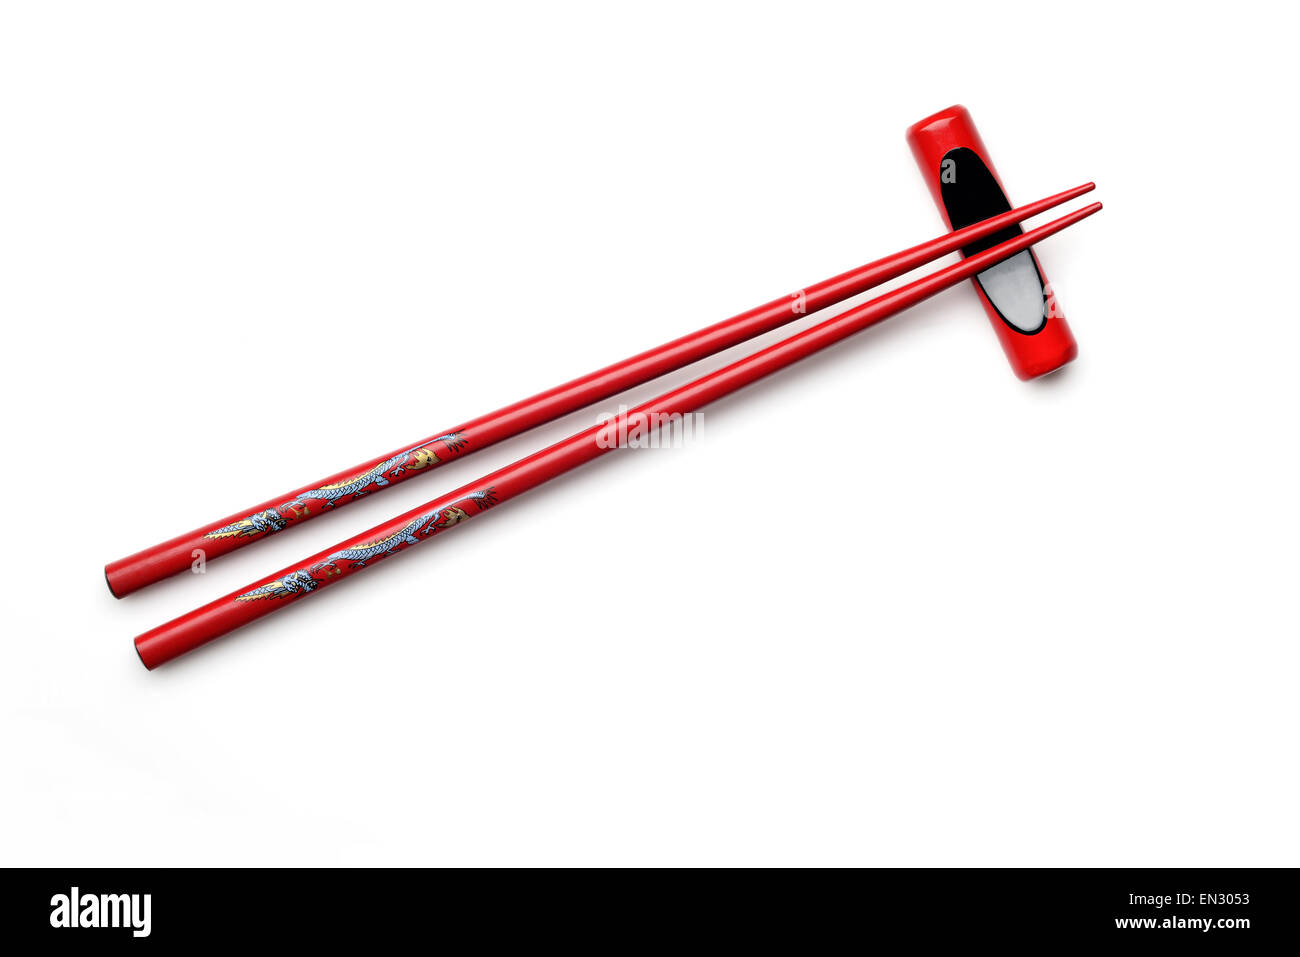 High resolution image of red wooden chopsticks with chopstick rest Stock Photo